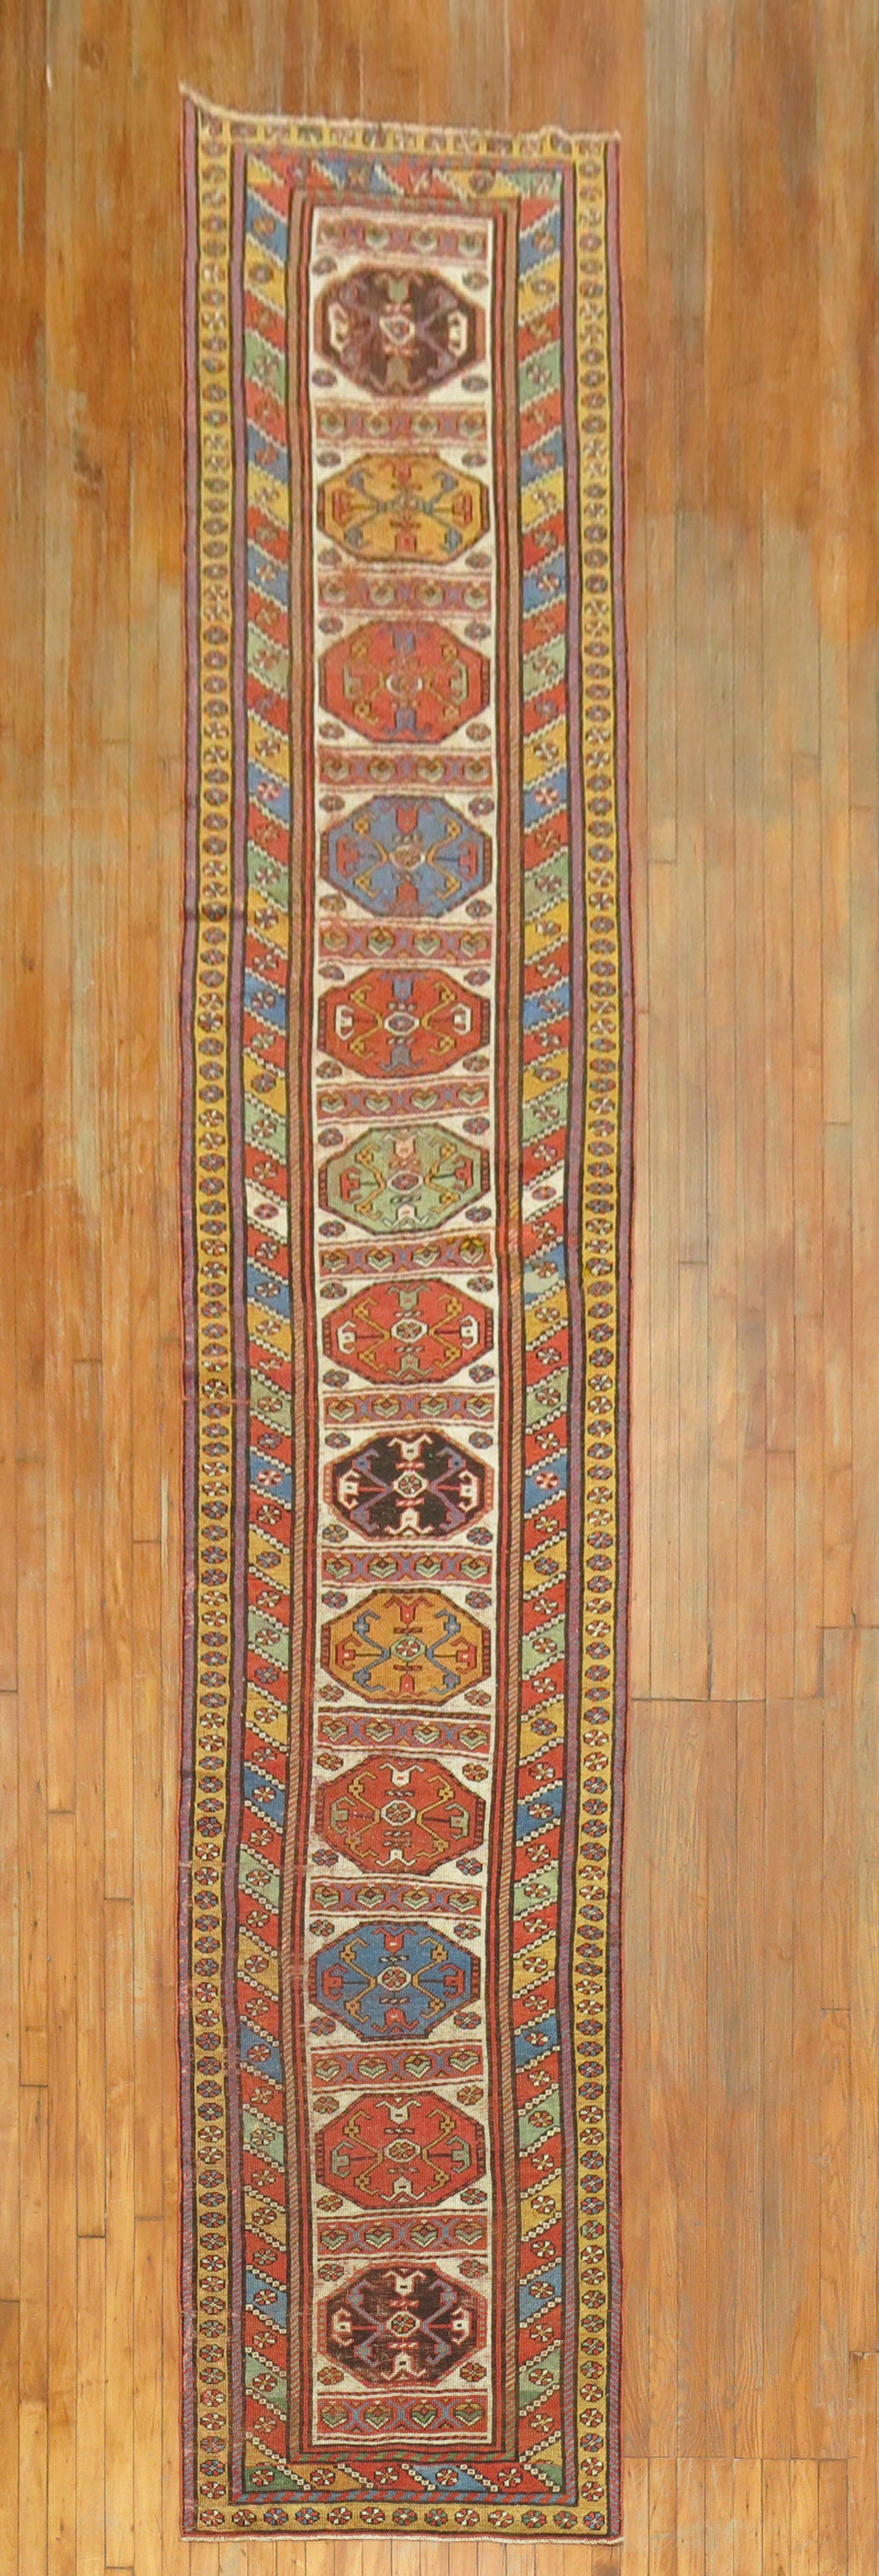 Spectacular tribal Kurdish runner from the 1st quarter of the 20th century

Measures: 3' x 16'5”.